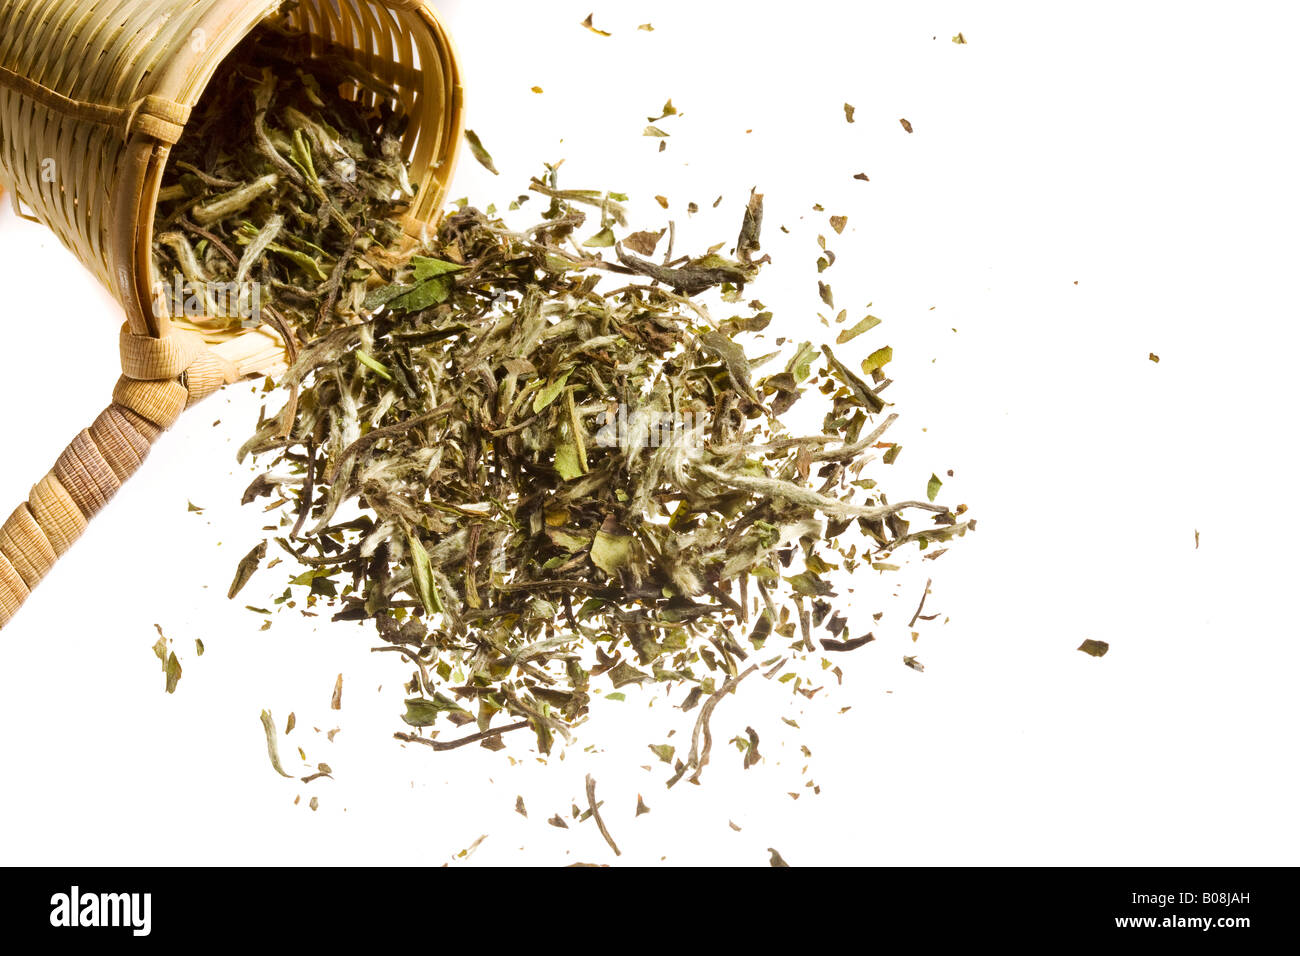 An overflowing heap of raw tea spilling out of a woven scooper. Stock Photo